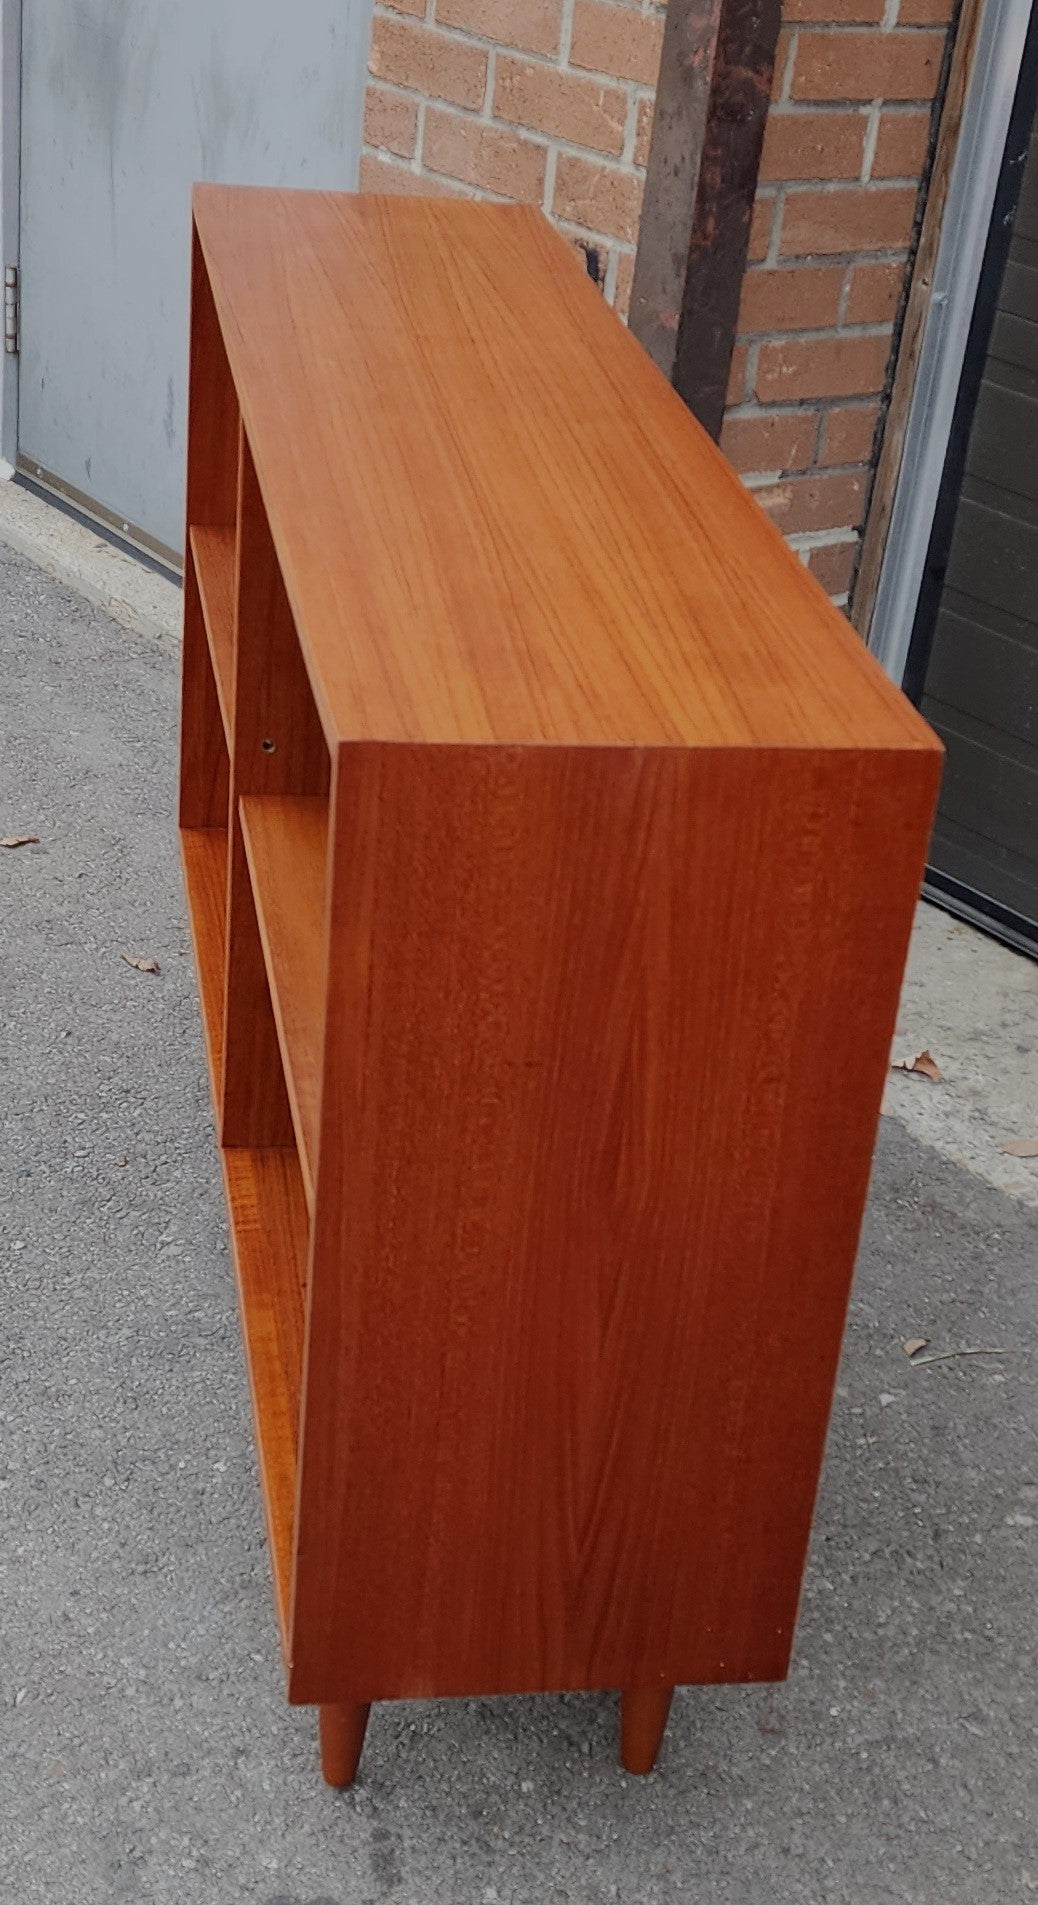 REFINISHED Mid Century Modern Teak Bookcase by Huber